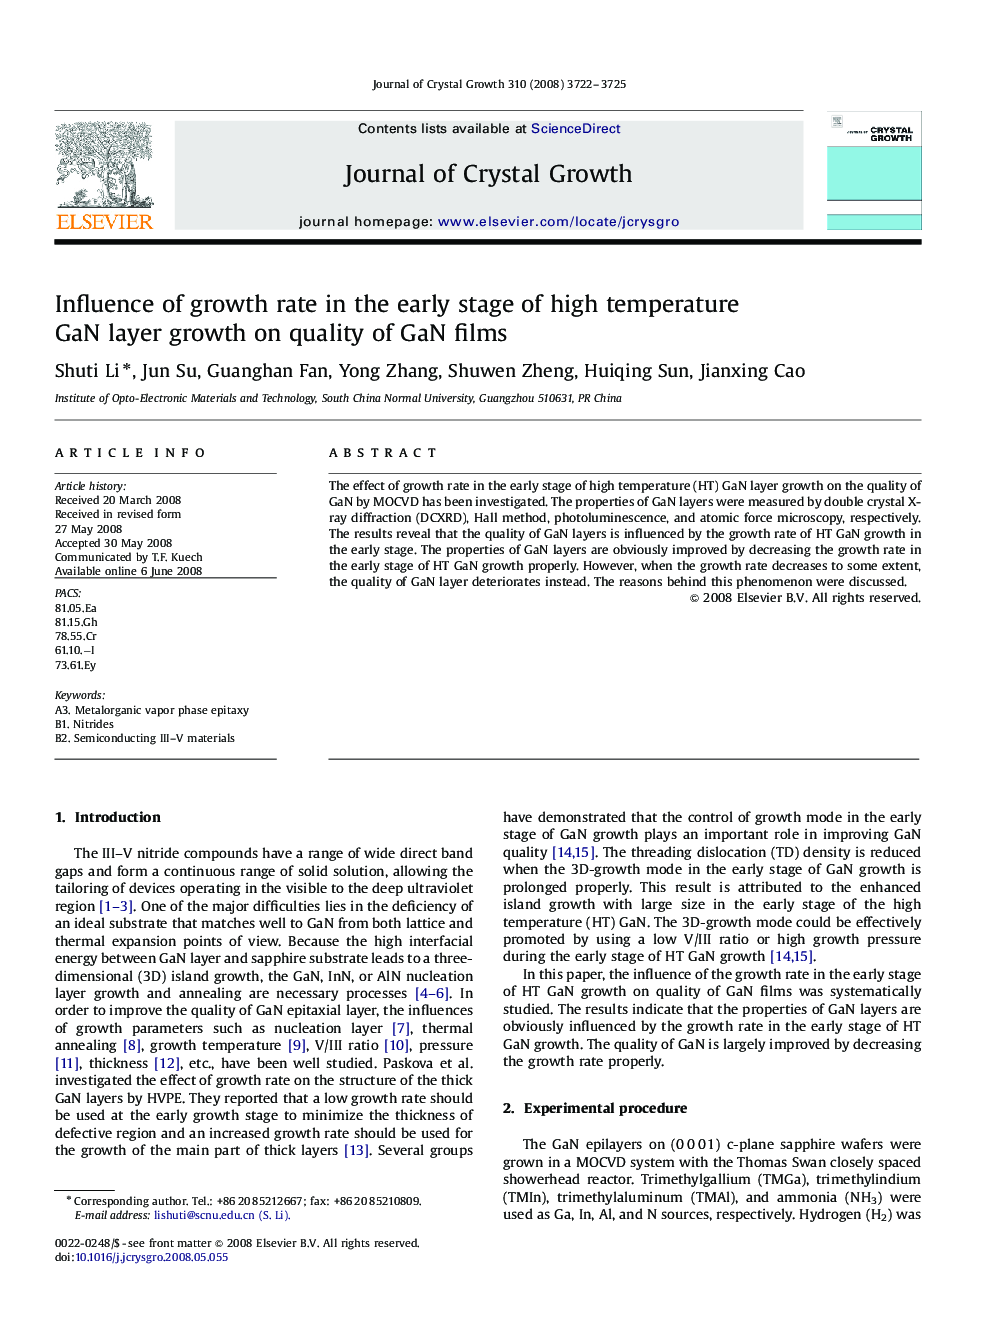 Influence of growth rate in the early stage of high temperature GaN layer growth on quality of GaN films